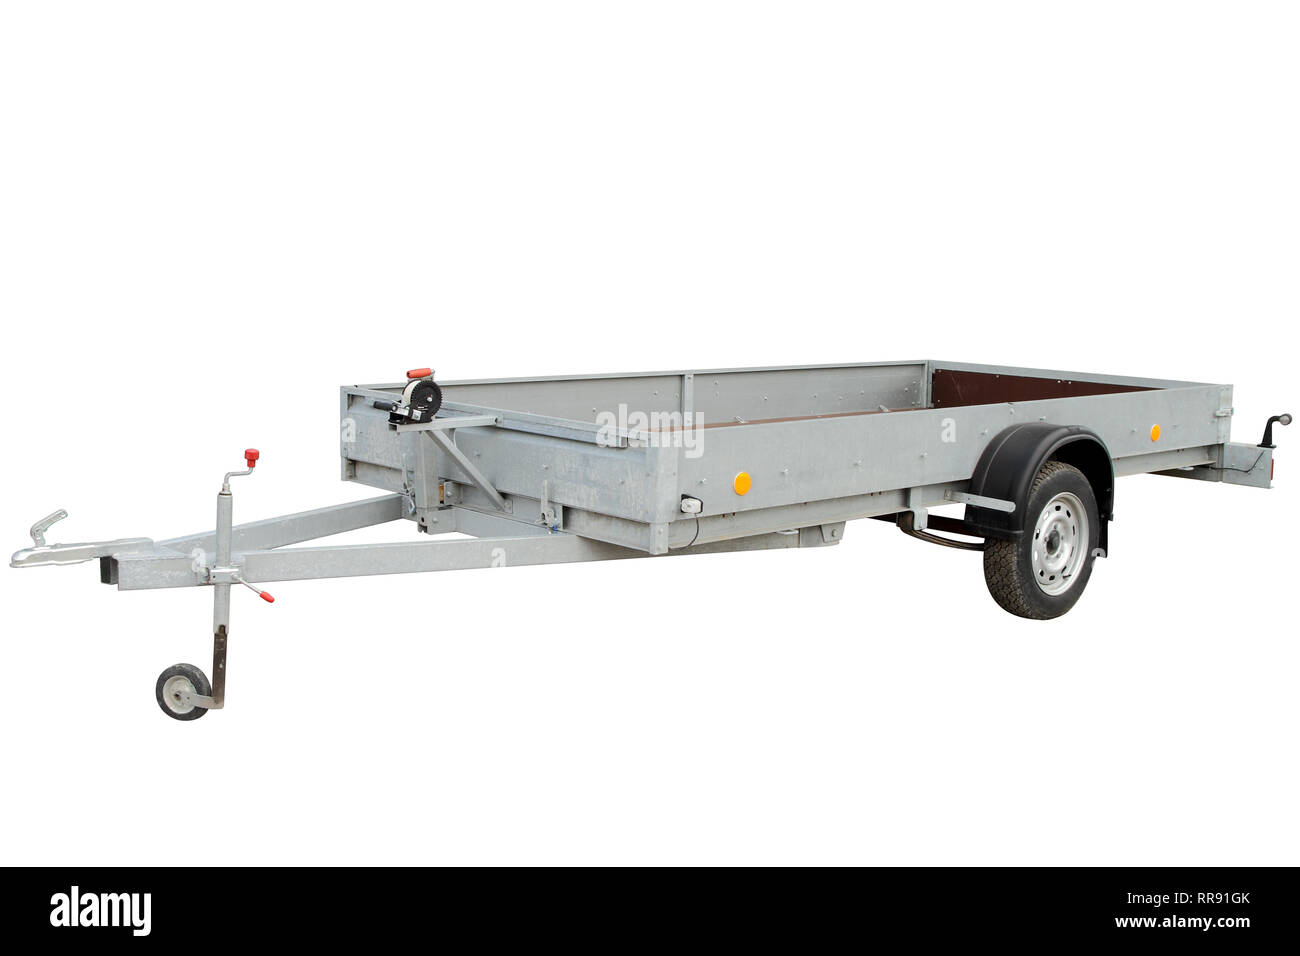 Open car trailer, isolated on white background. Stock Photo